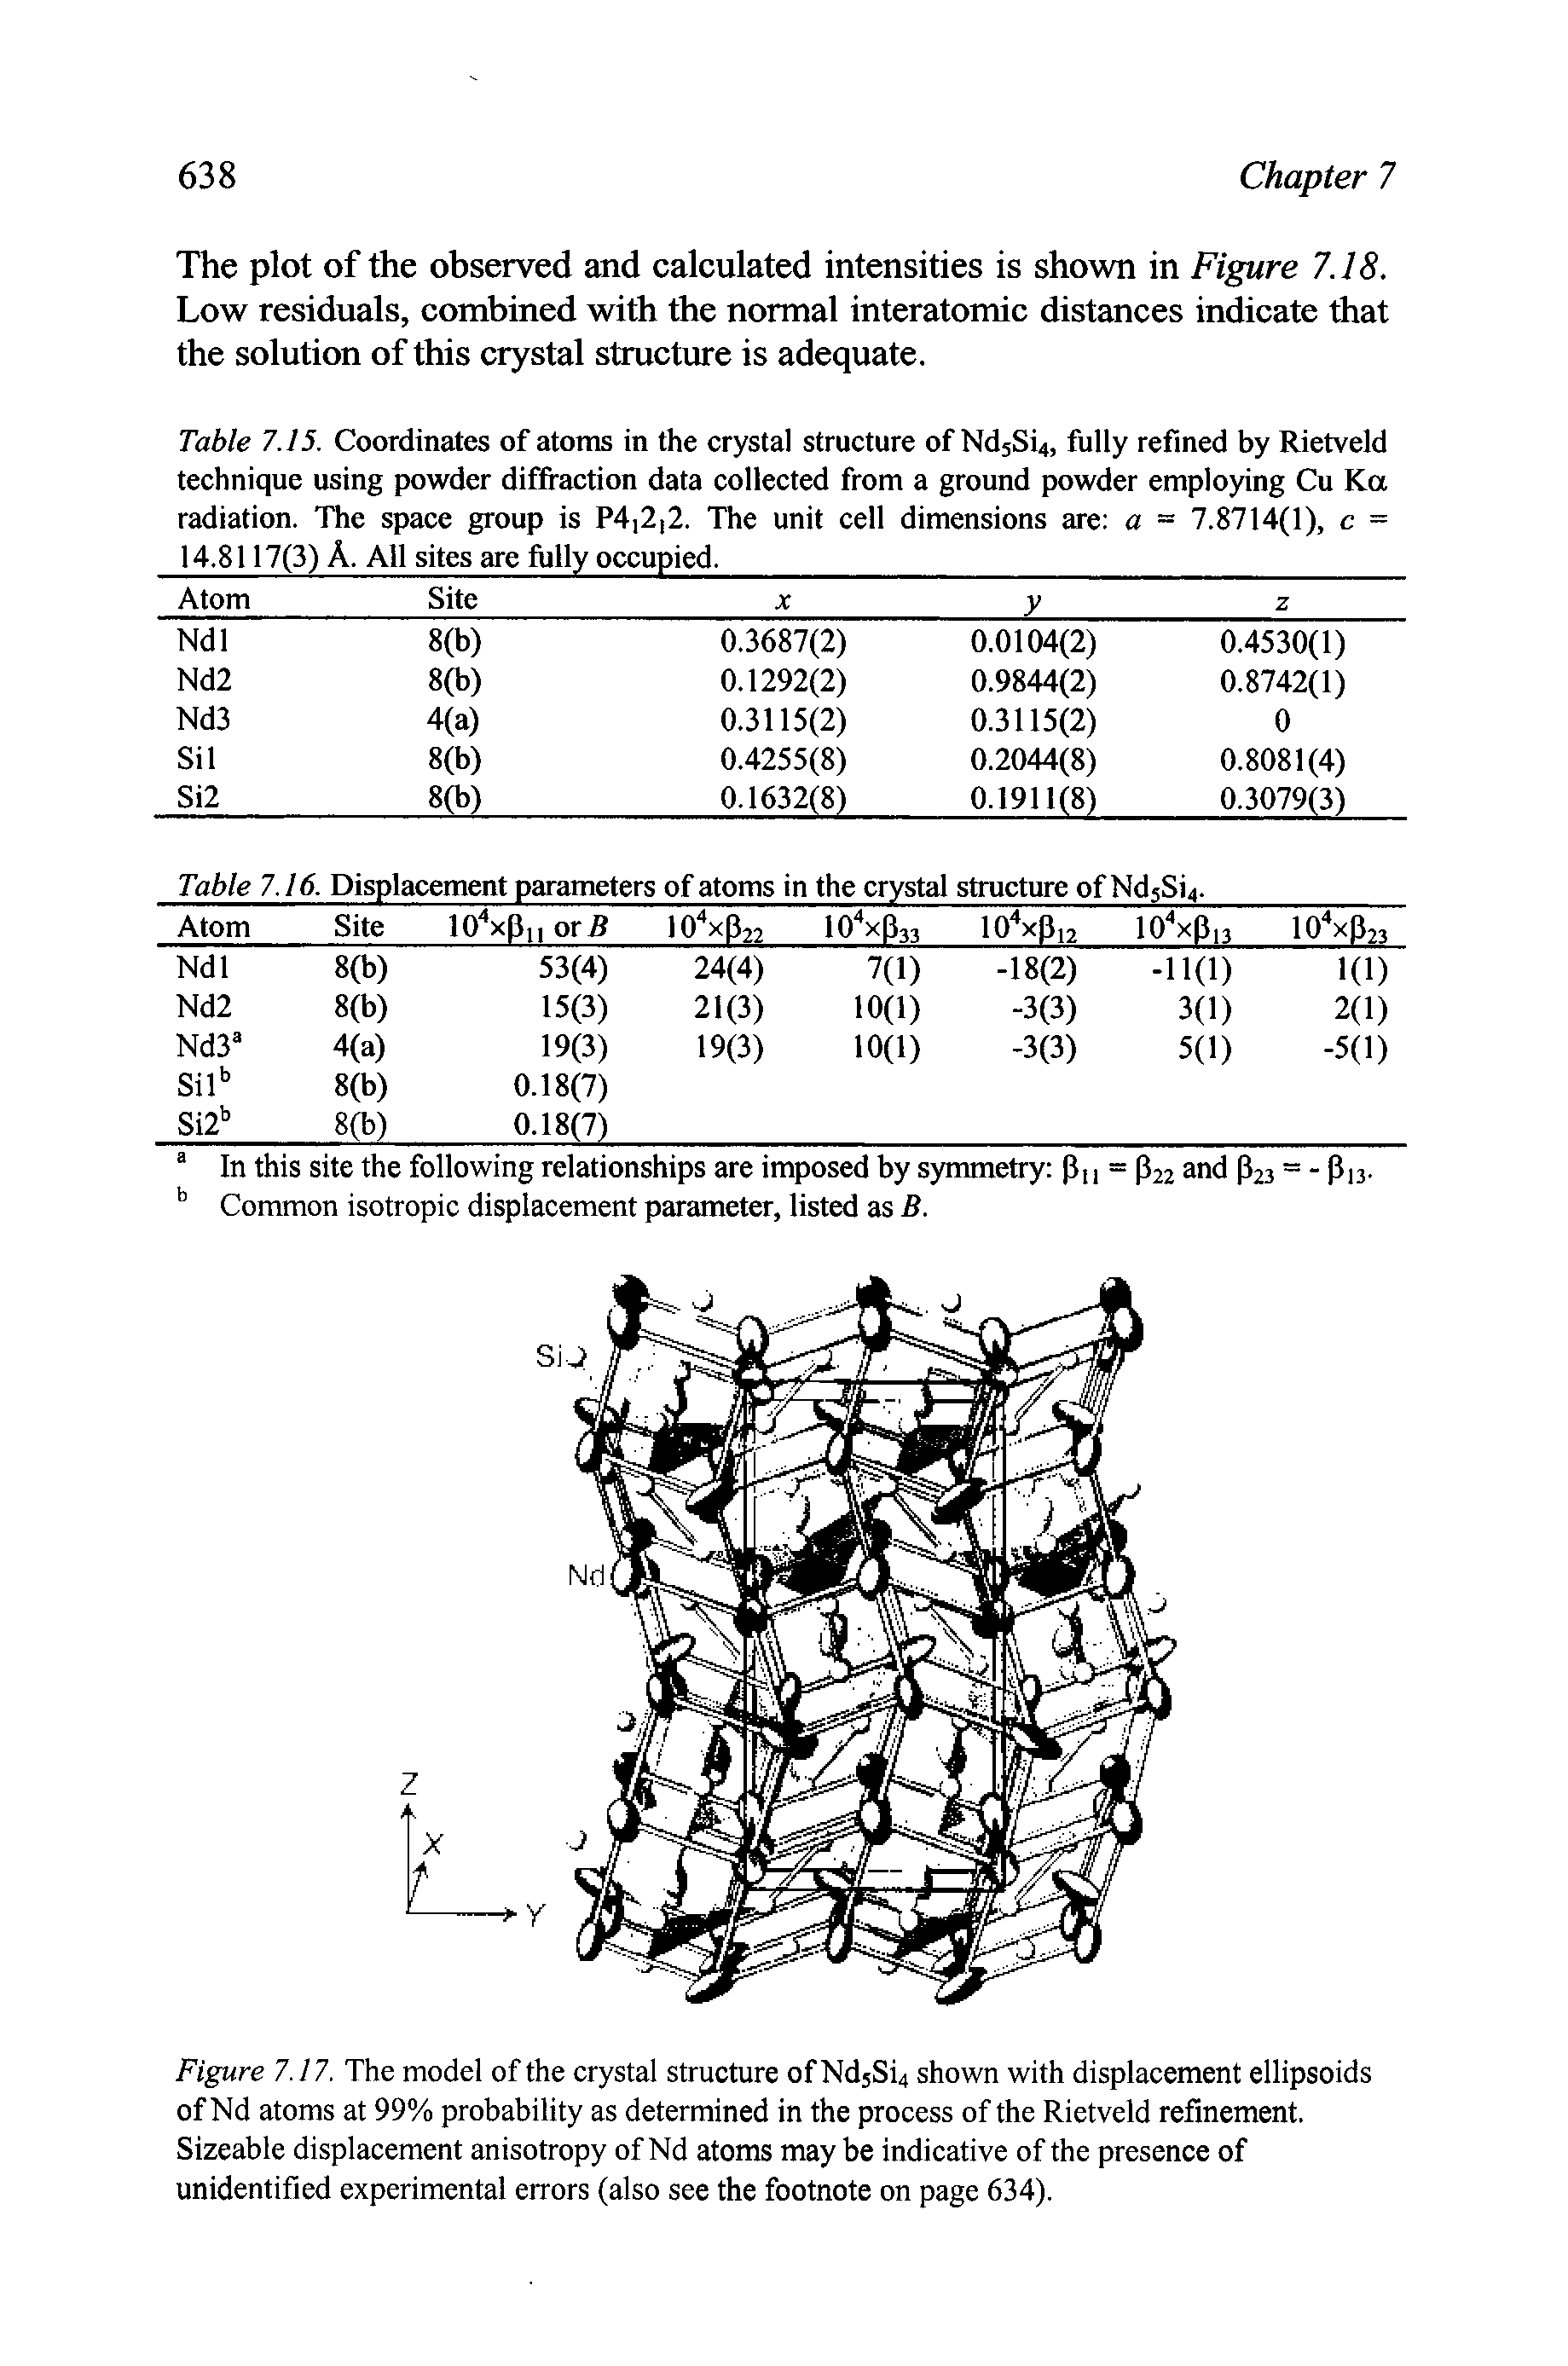 Figure 7.17. The model of the crystal structure ofNd5Si4 shown with displacement ellipsoids of Nd atoms at 99% probability as determined in the process of the Rietveld refinement. Sizeable displacement anisotropy of Nd atoms may be indicative of the presence of unidentified experimental errors (also see the footnote on page 634).